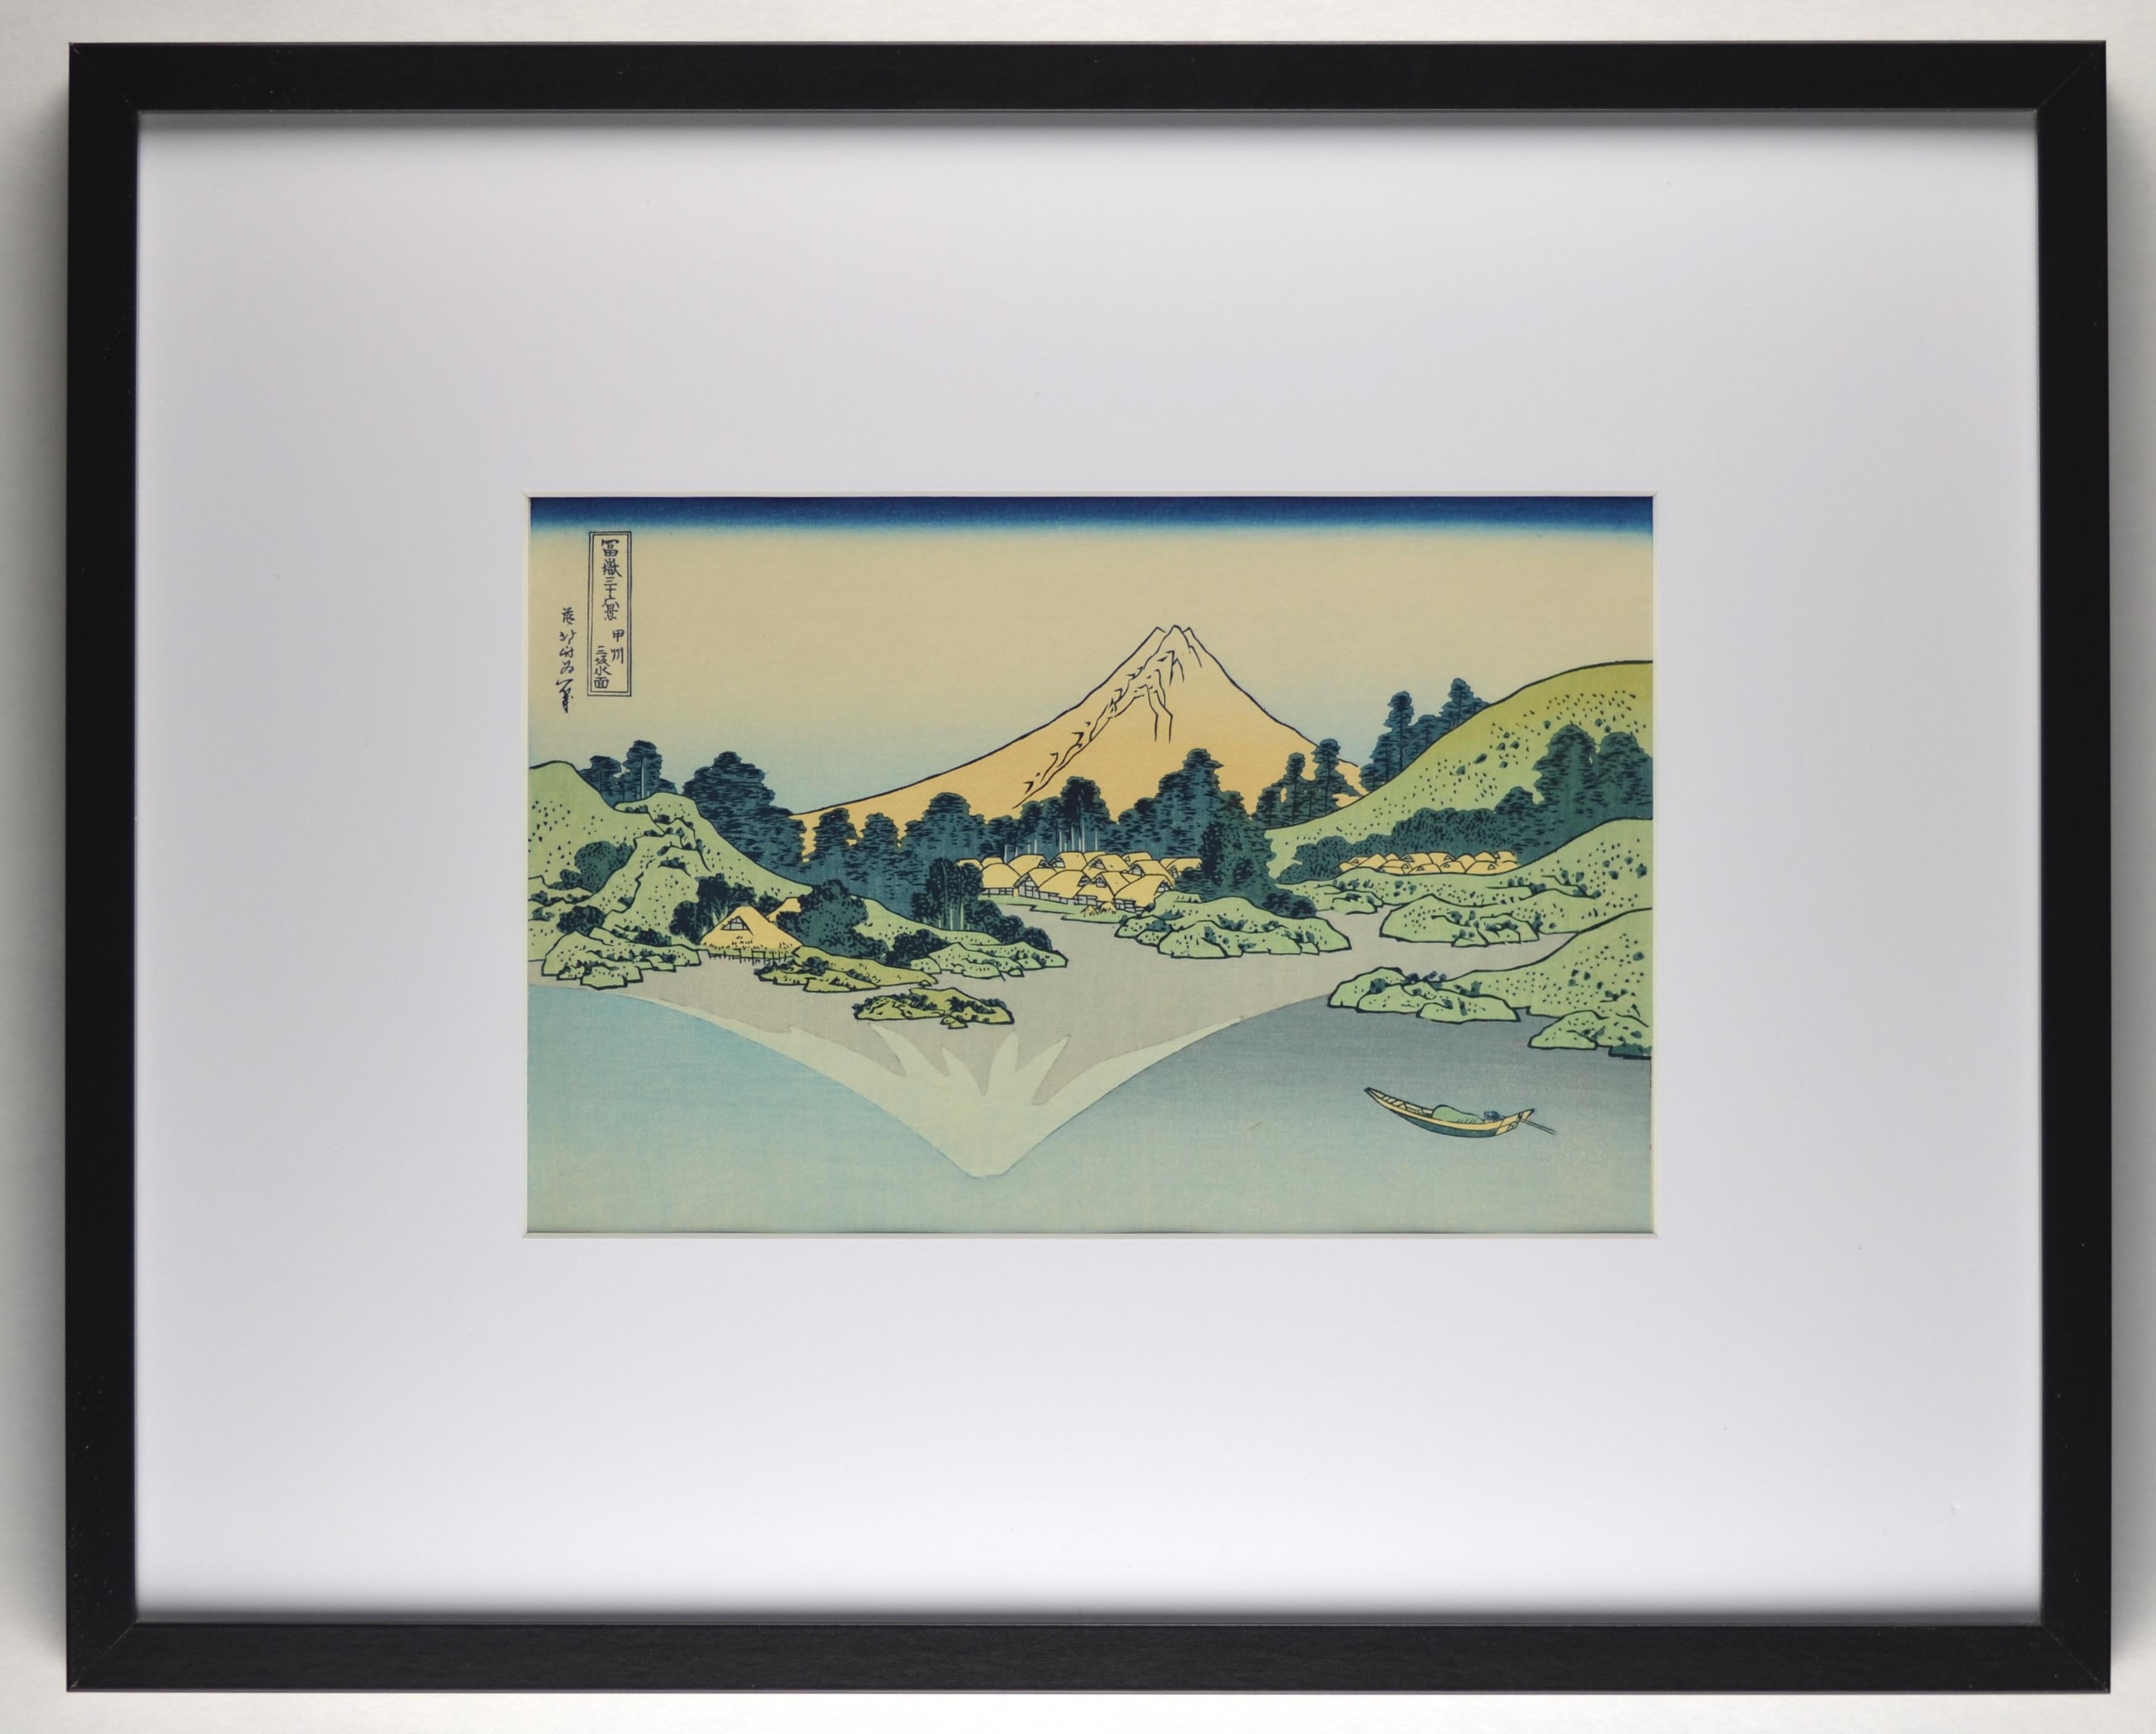 This offer includes a real fine 20th century woodblock reprint of Katsushika Hokusai's Thirty-six Views of Mt. Fuji. The series, originally published between 1830-1832, marks the height of Hokusai's career. This reprint shows the 25th view of Mt.